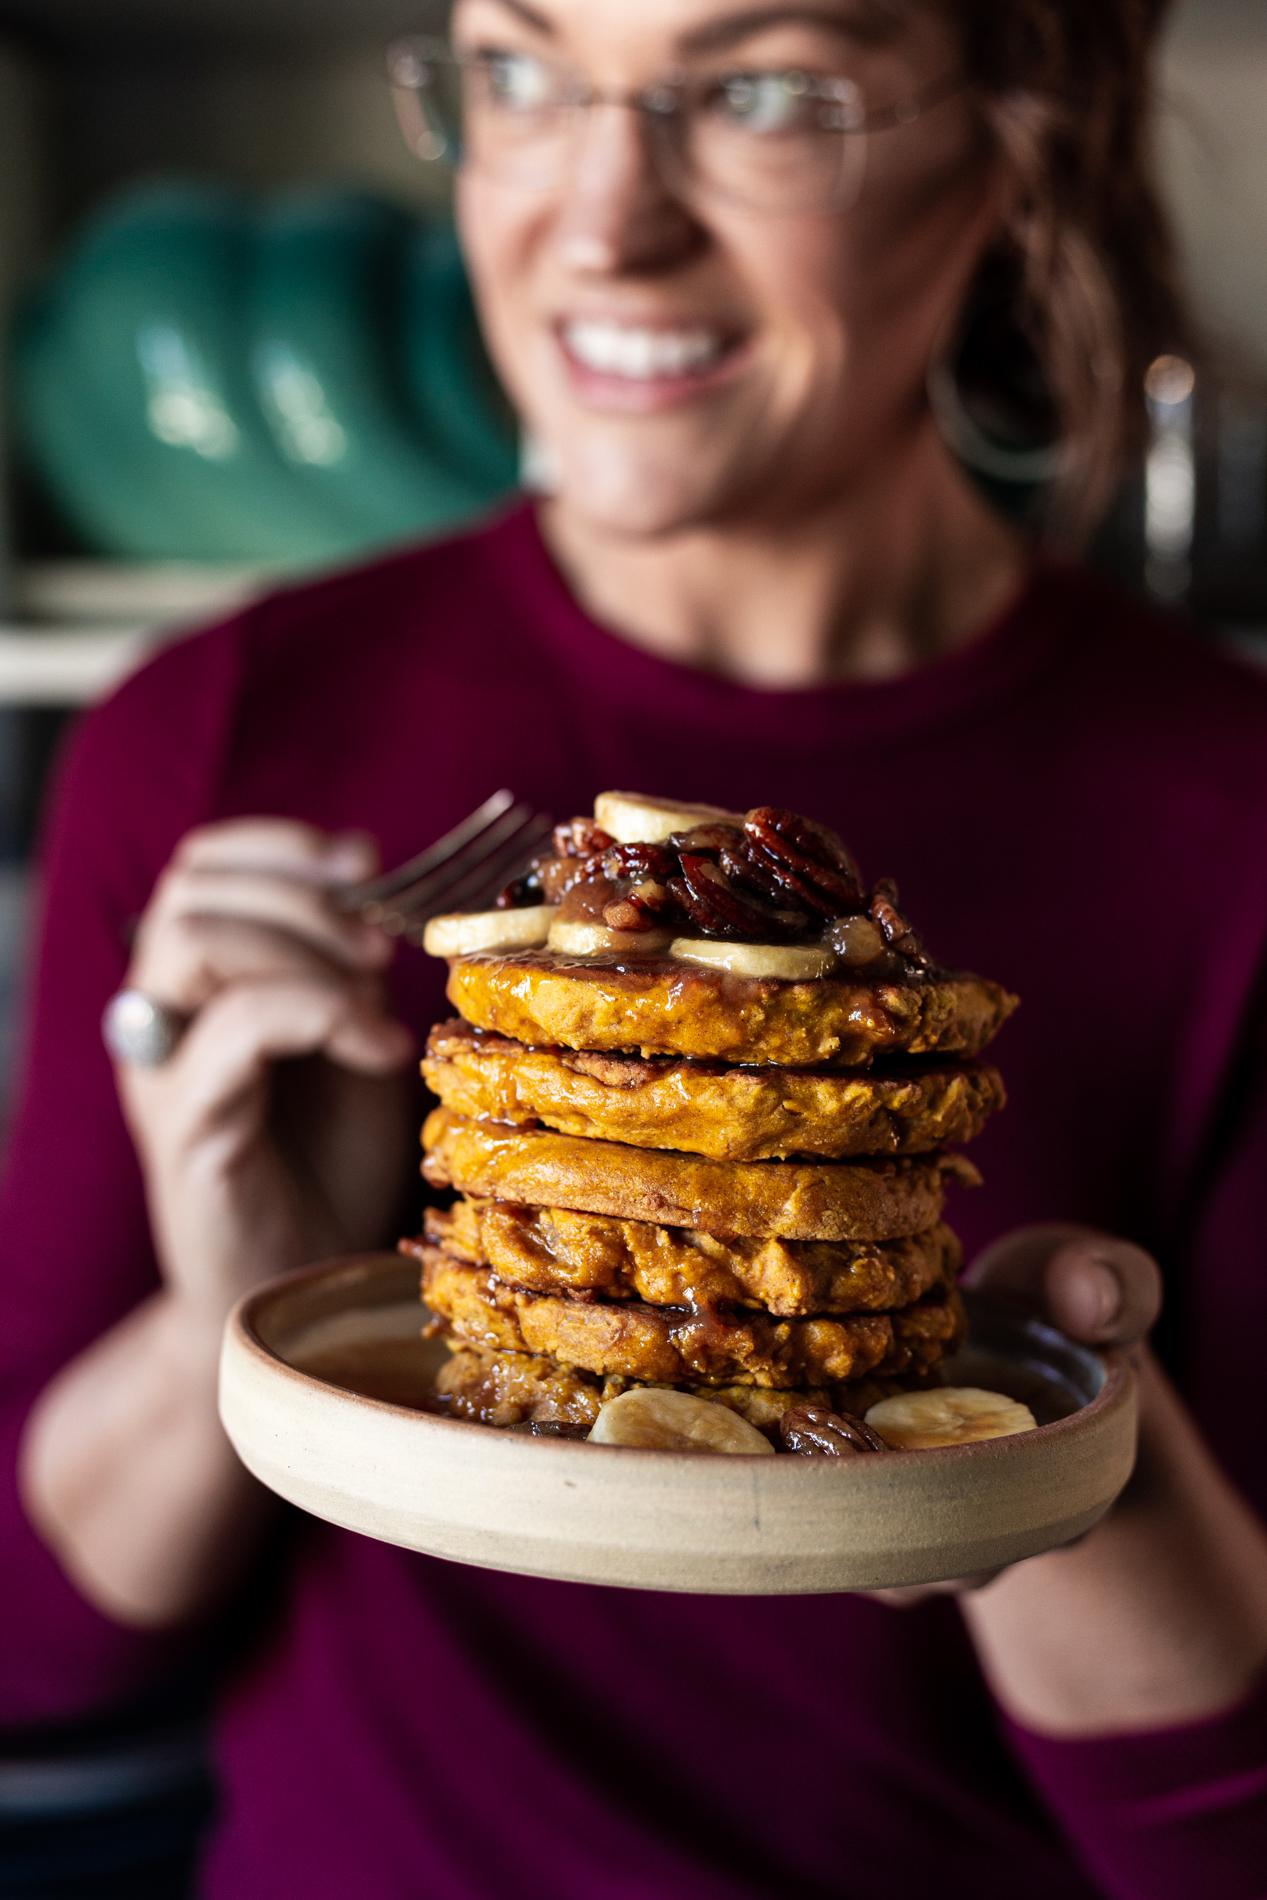 karly with a stack of pumpkin bread griddle cakes topped with caramelized bananas and pecans